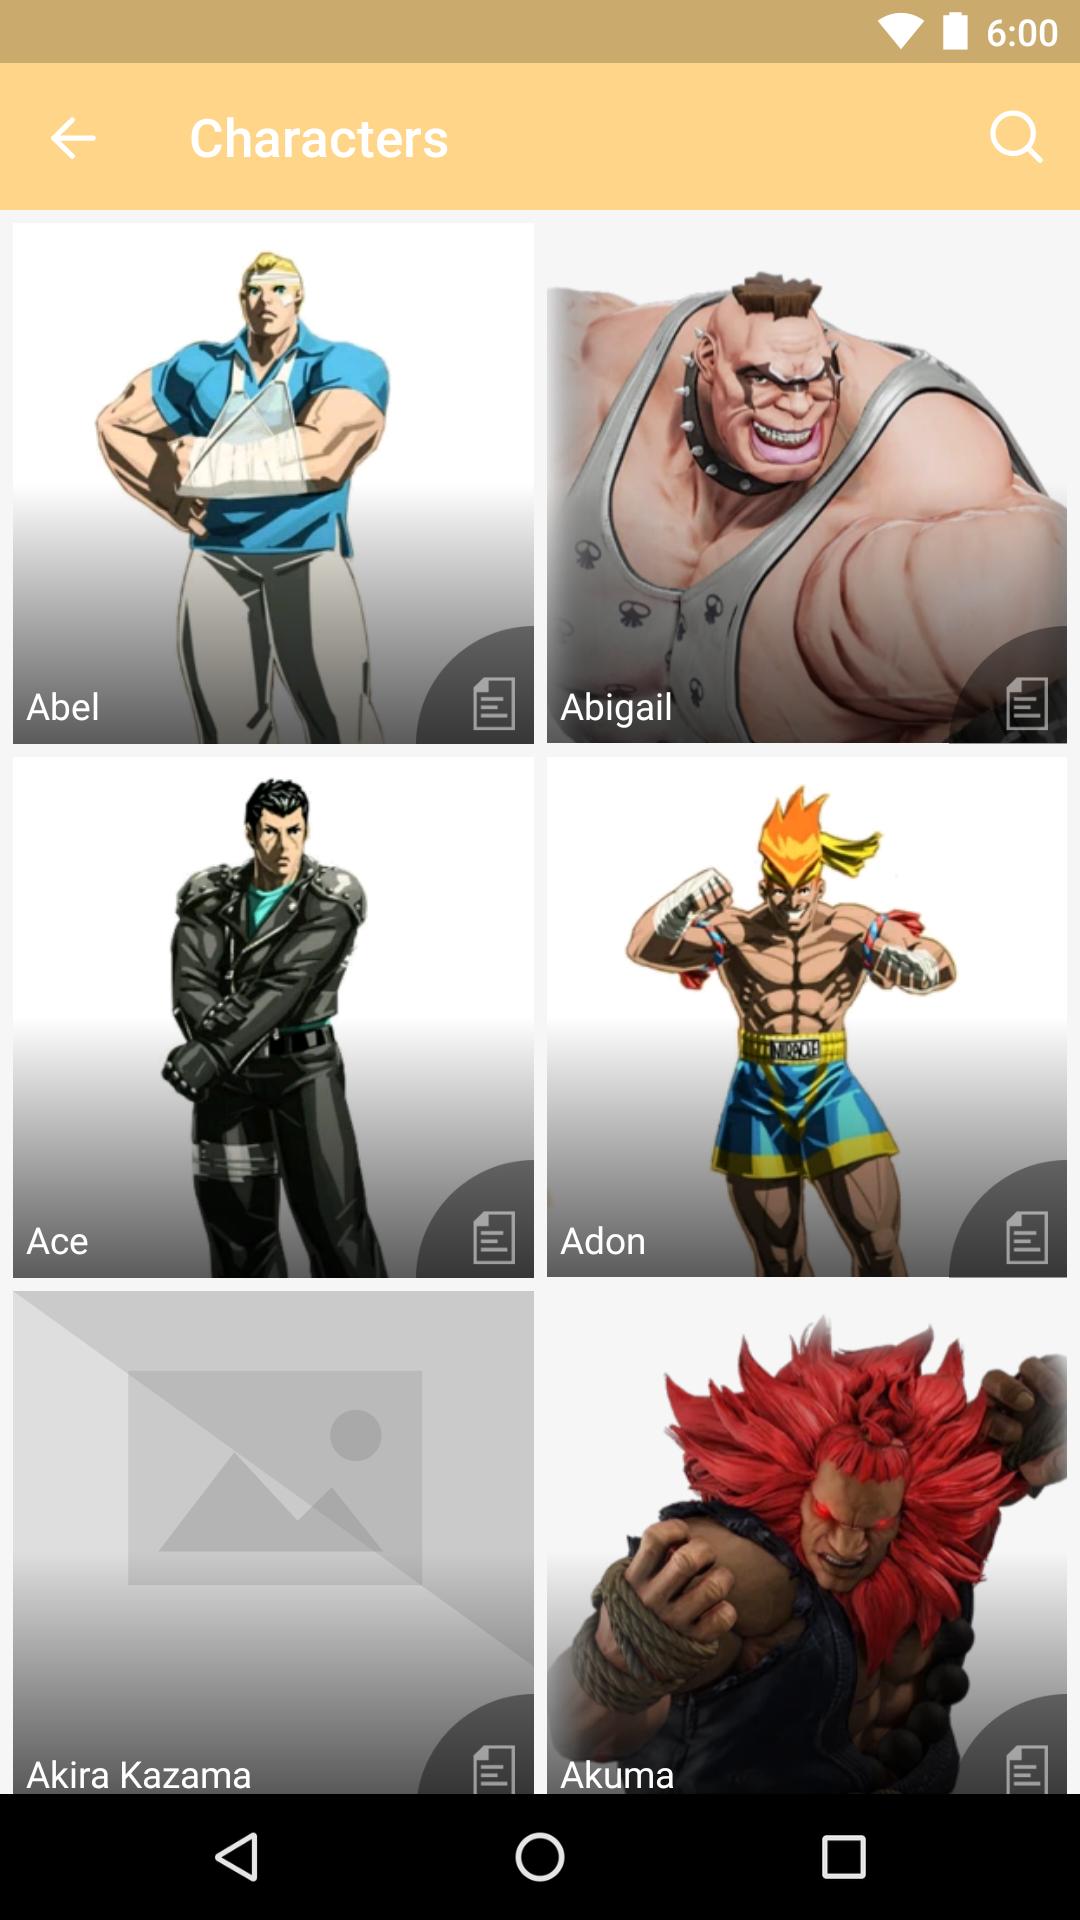 Fandom For Street Fighter For Android Apk Download - xbox player the streets roblox wiki fandom